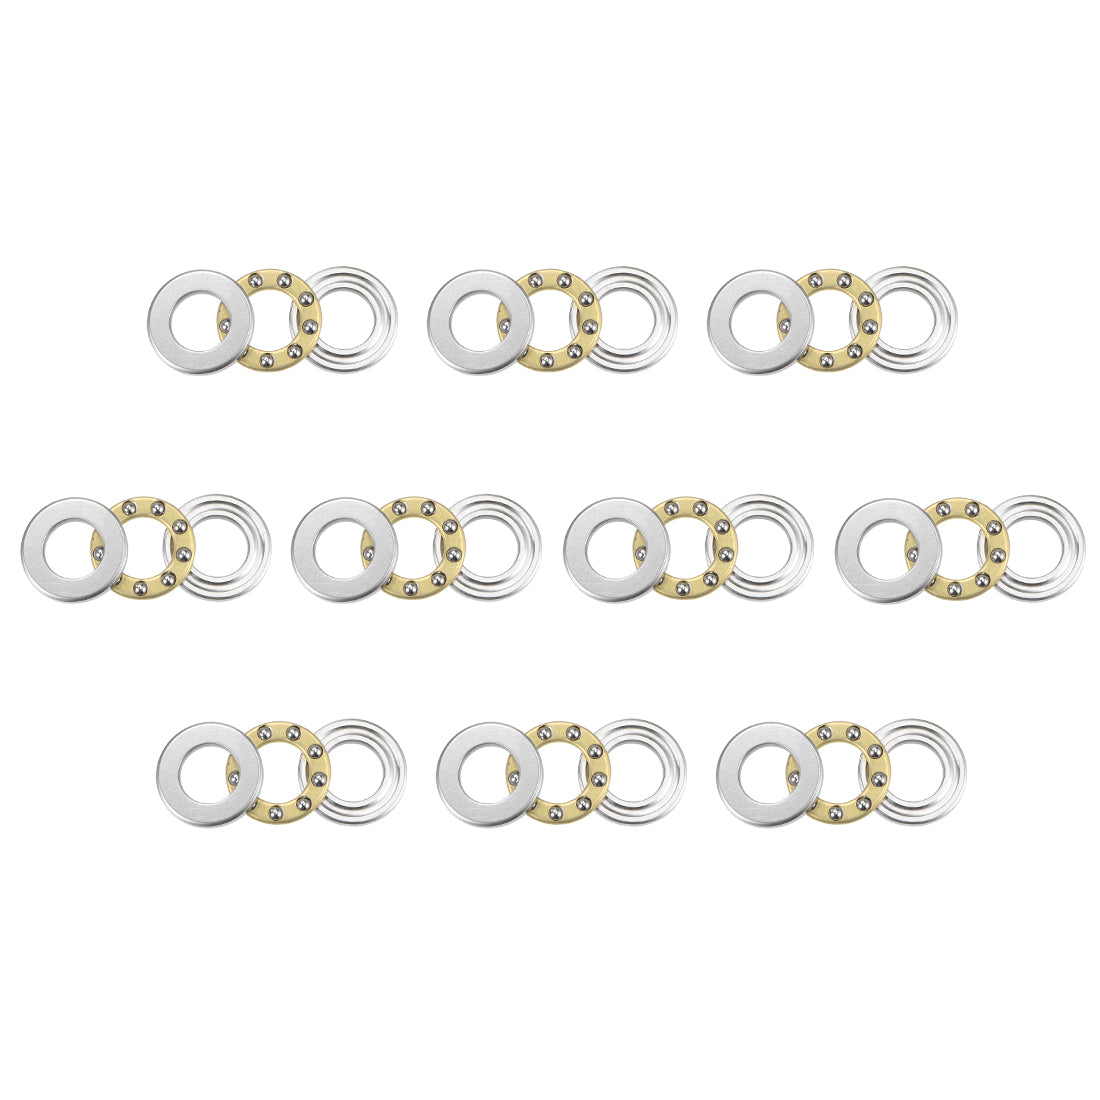 uxcell Uxcell F6-14M Miniature Thrust Ball Bearing 6x14x5mm Chrome Steel with Washer 10Pcs